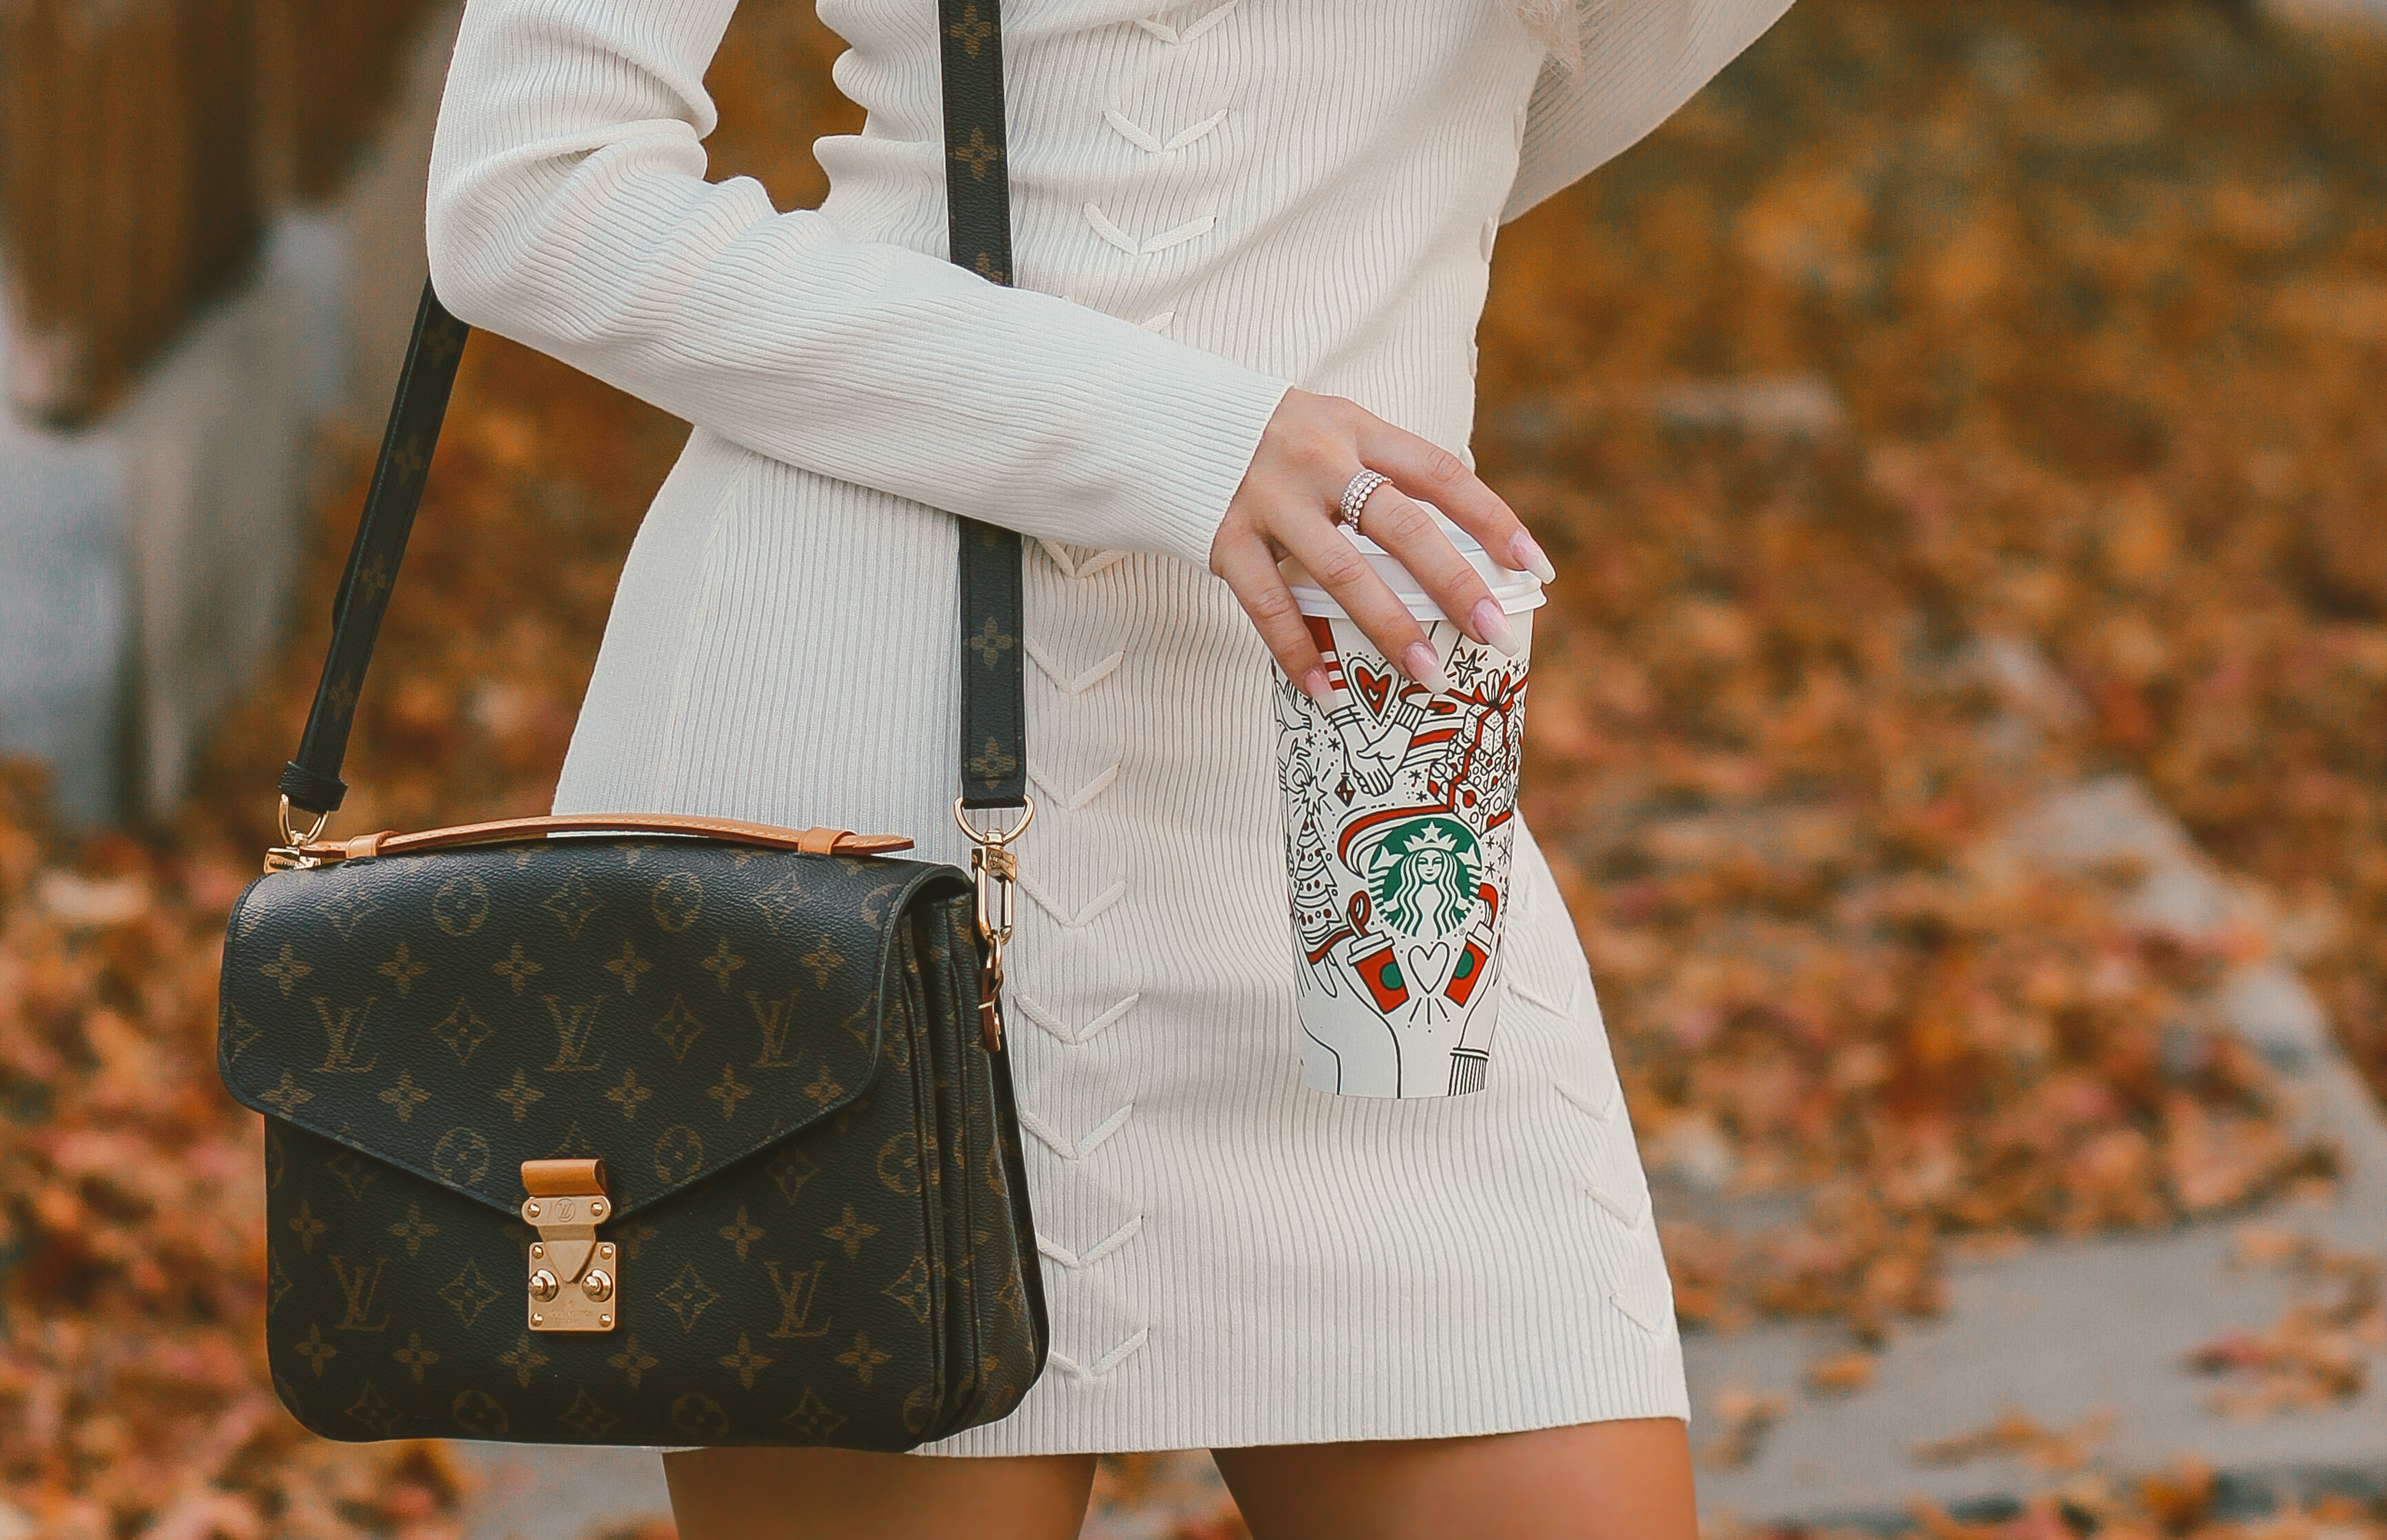 Blondie in the City | Cozy White Sweater Dress | Fall Fashion | Louis Vuitton | Fall Leaves | Louboutin's